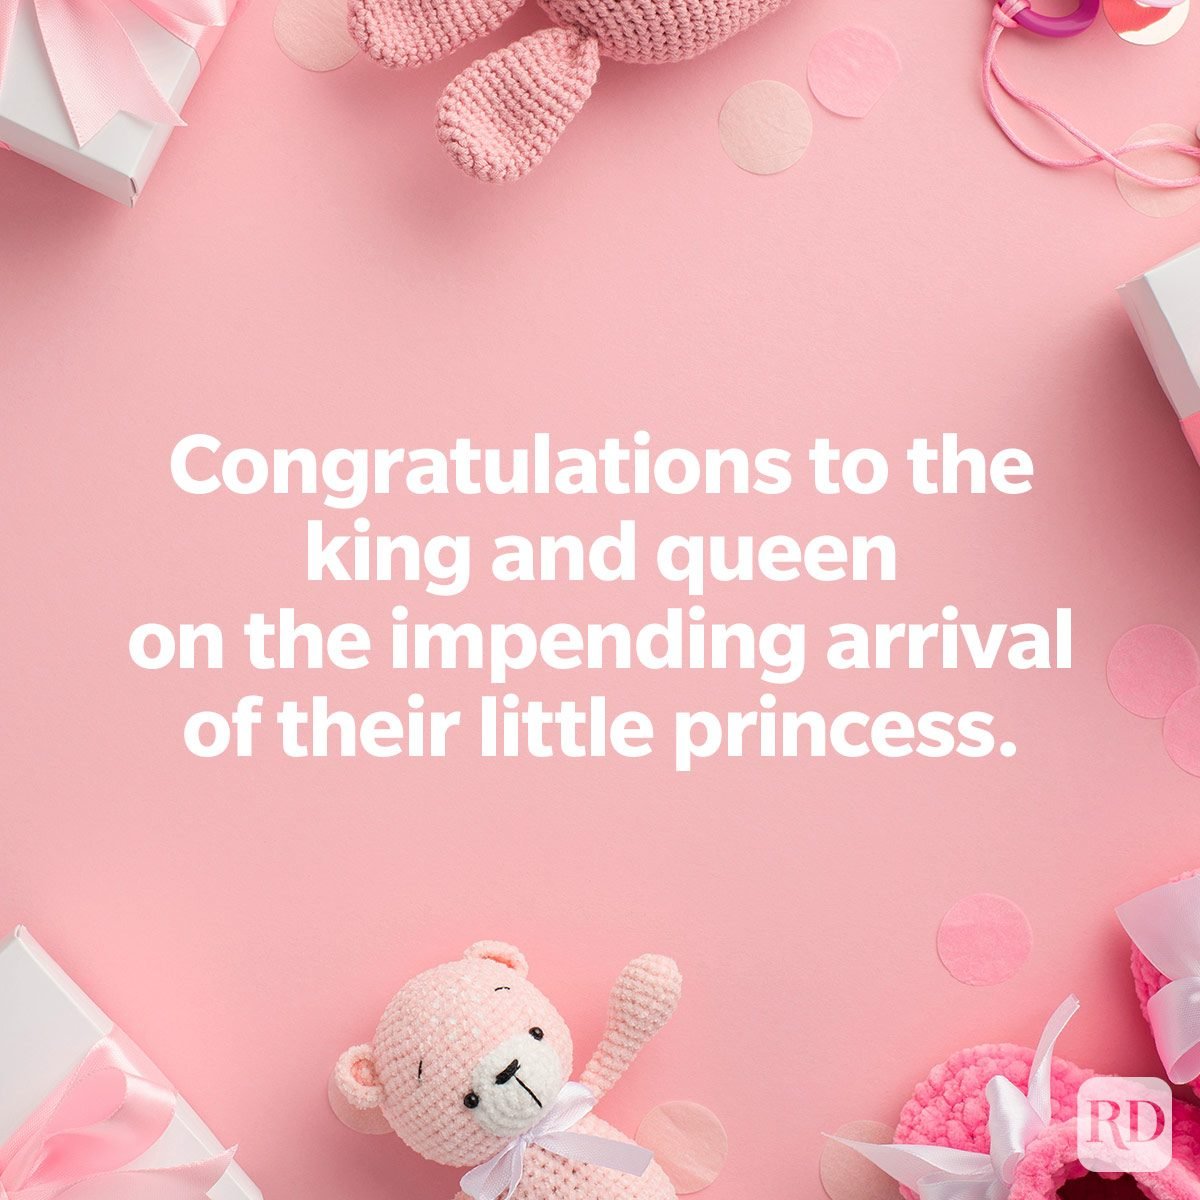 sweet baby wishes to send to expectant parents on baby toys and items background flat lay Congratulations to the king and queen on the impending arrival of their little princess.